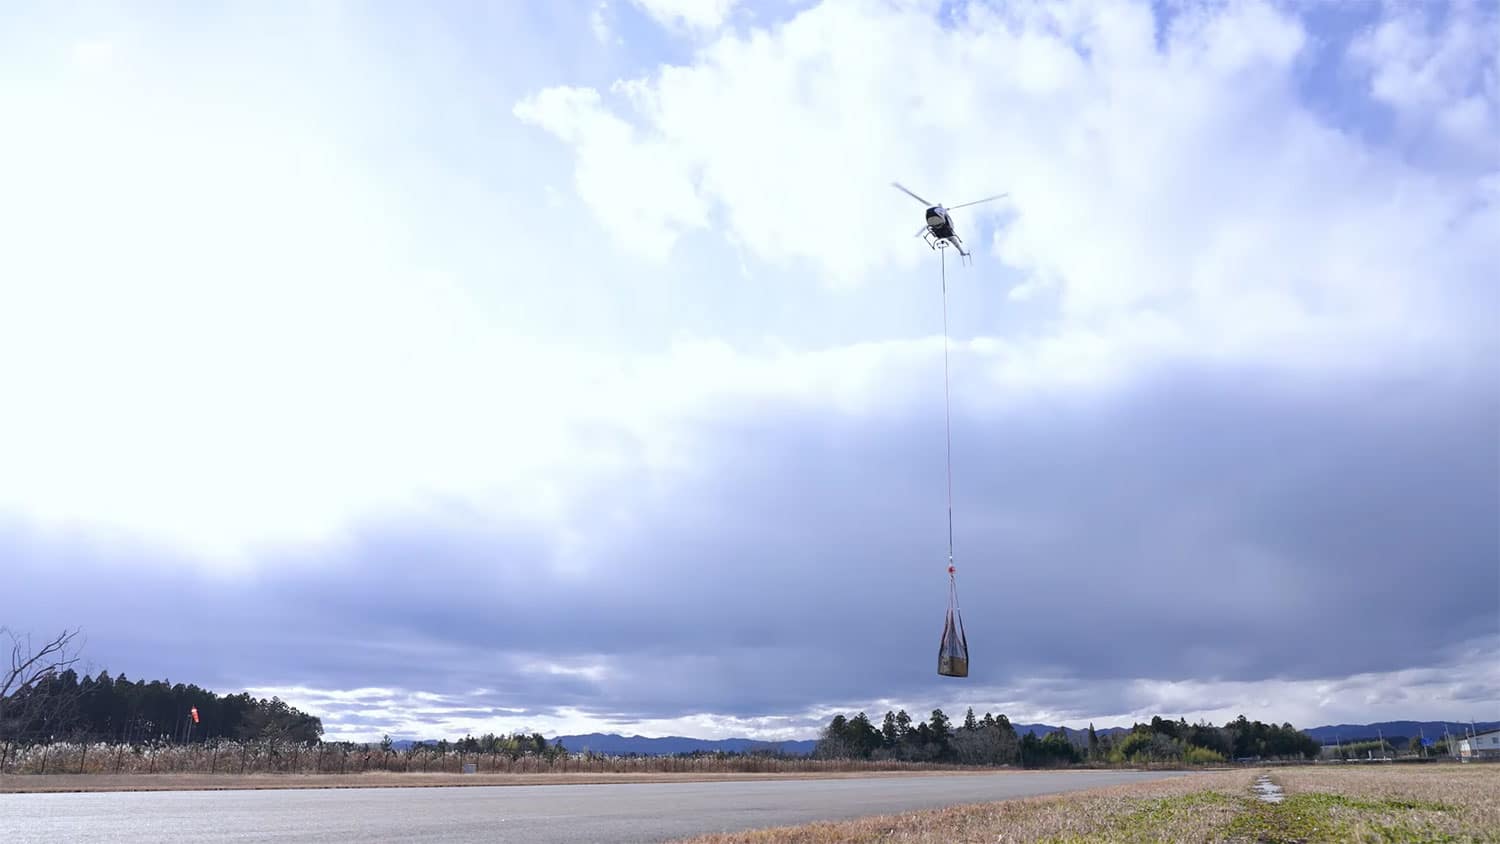 K-RACER-X2 unmanned demonstration helicopter demonstrated the useful load capacity of 200kg.